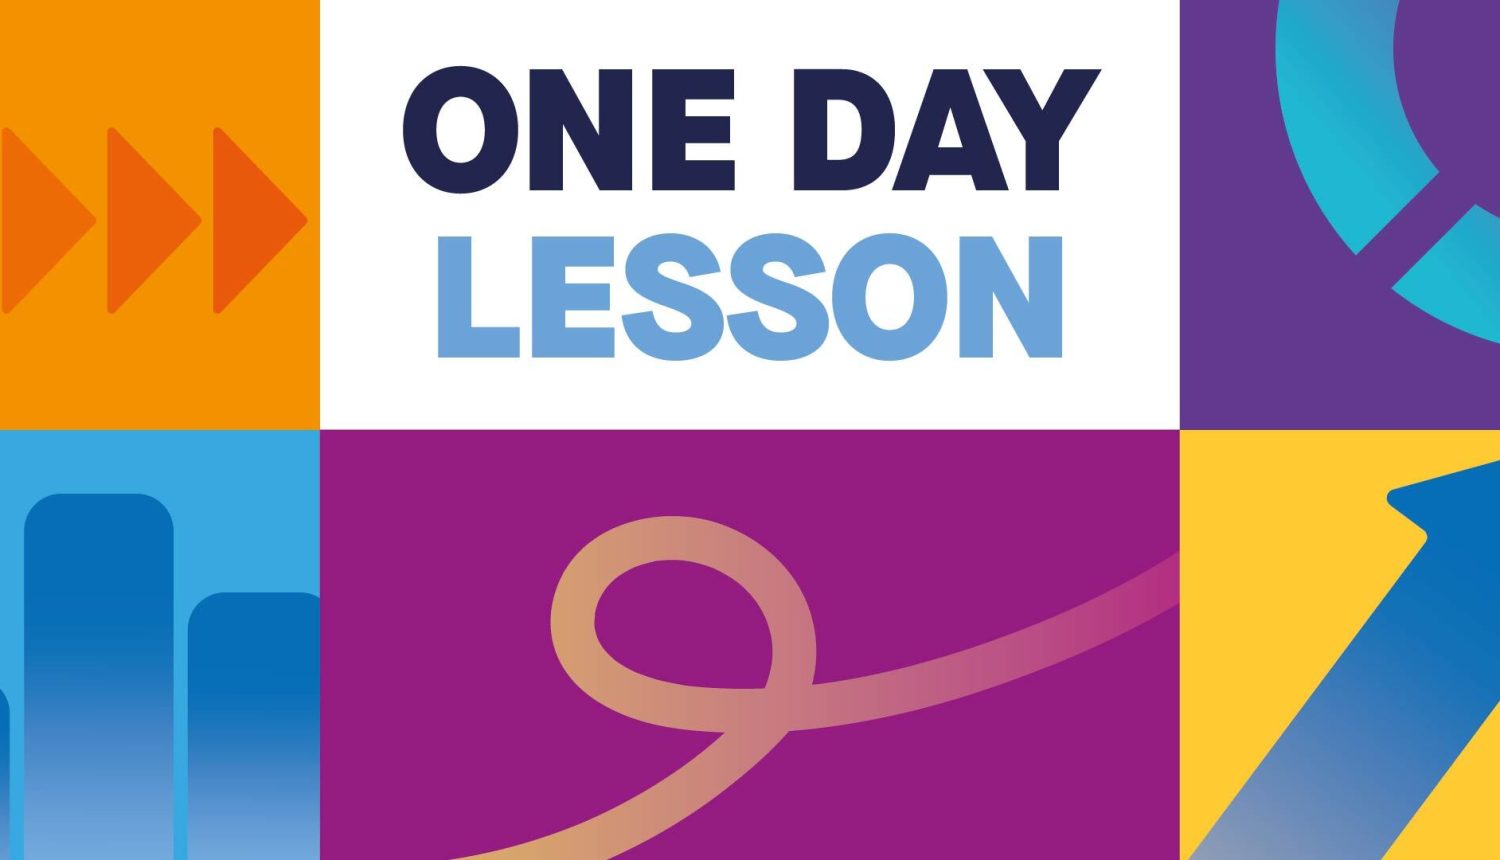 One Day Lesson